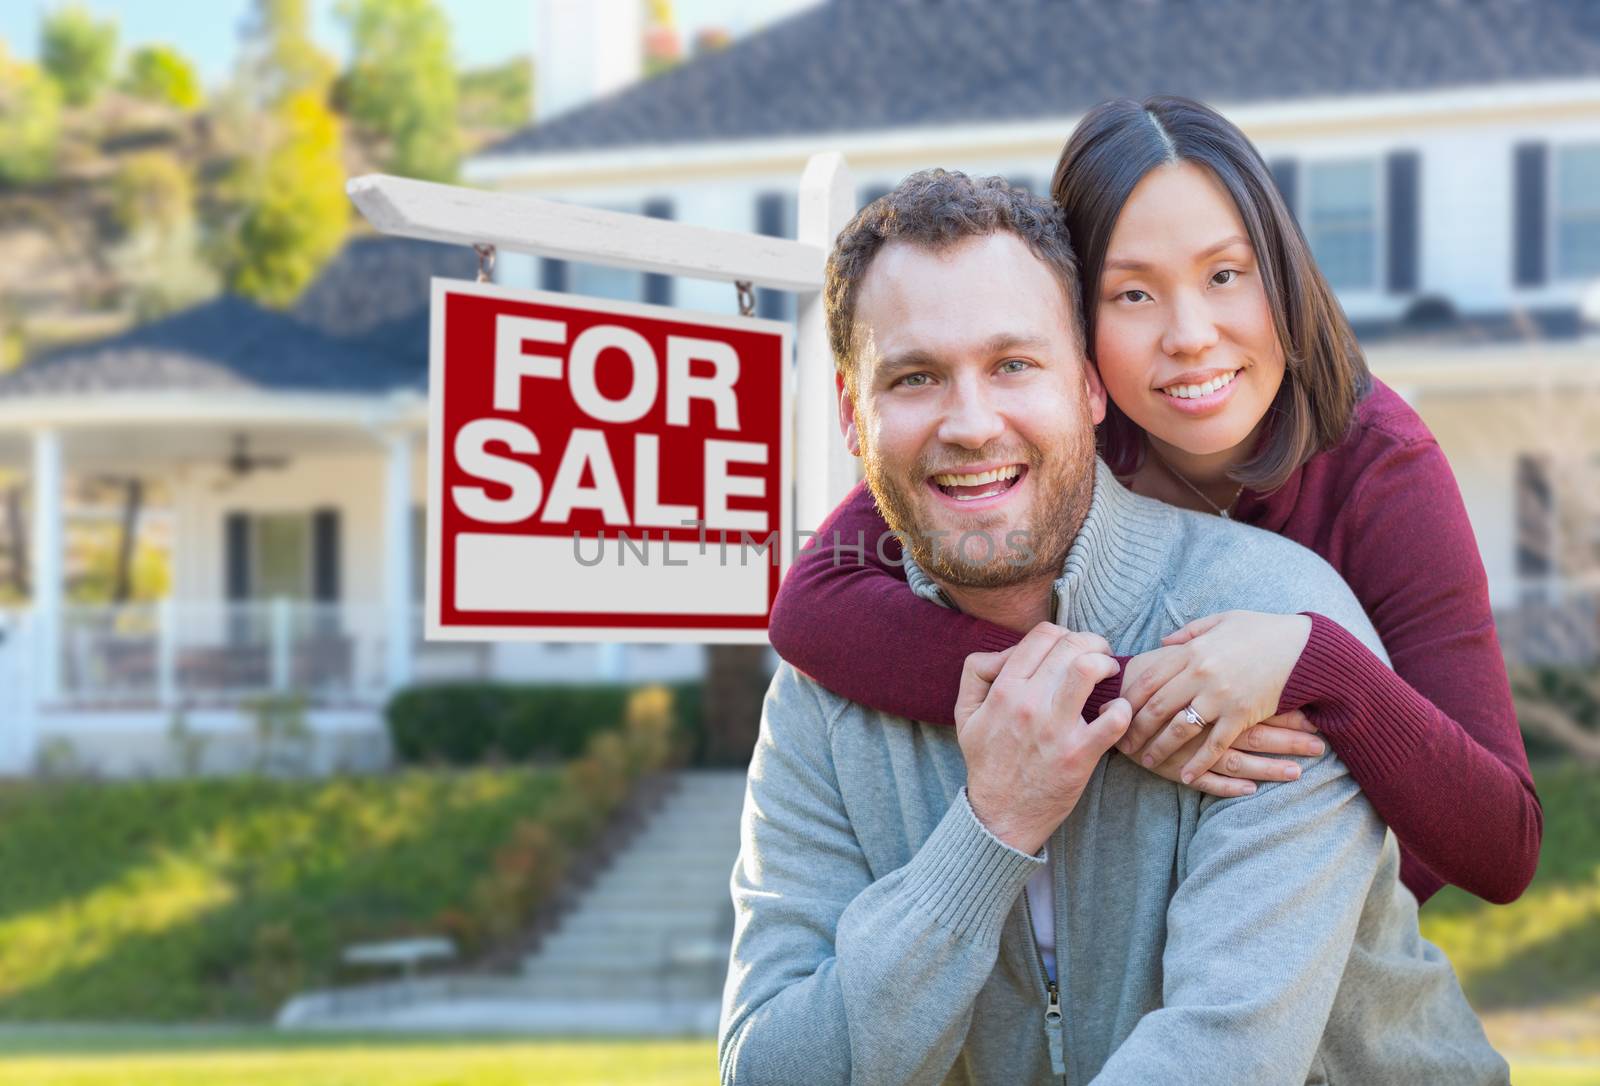 Mixed Race Caucasian and Chinese Couple In Front of For Sale Real Estate Sign and House.